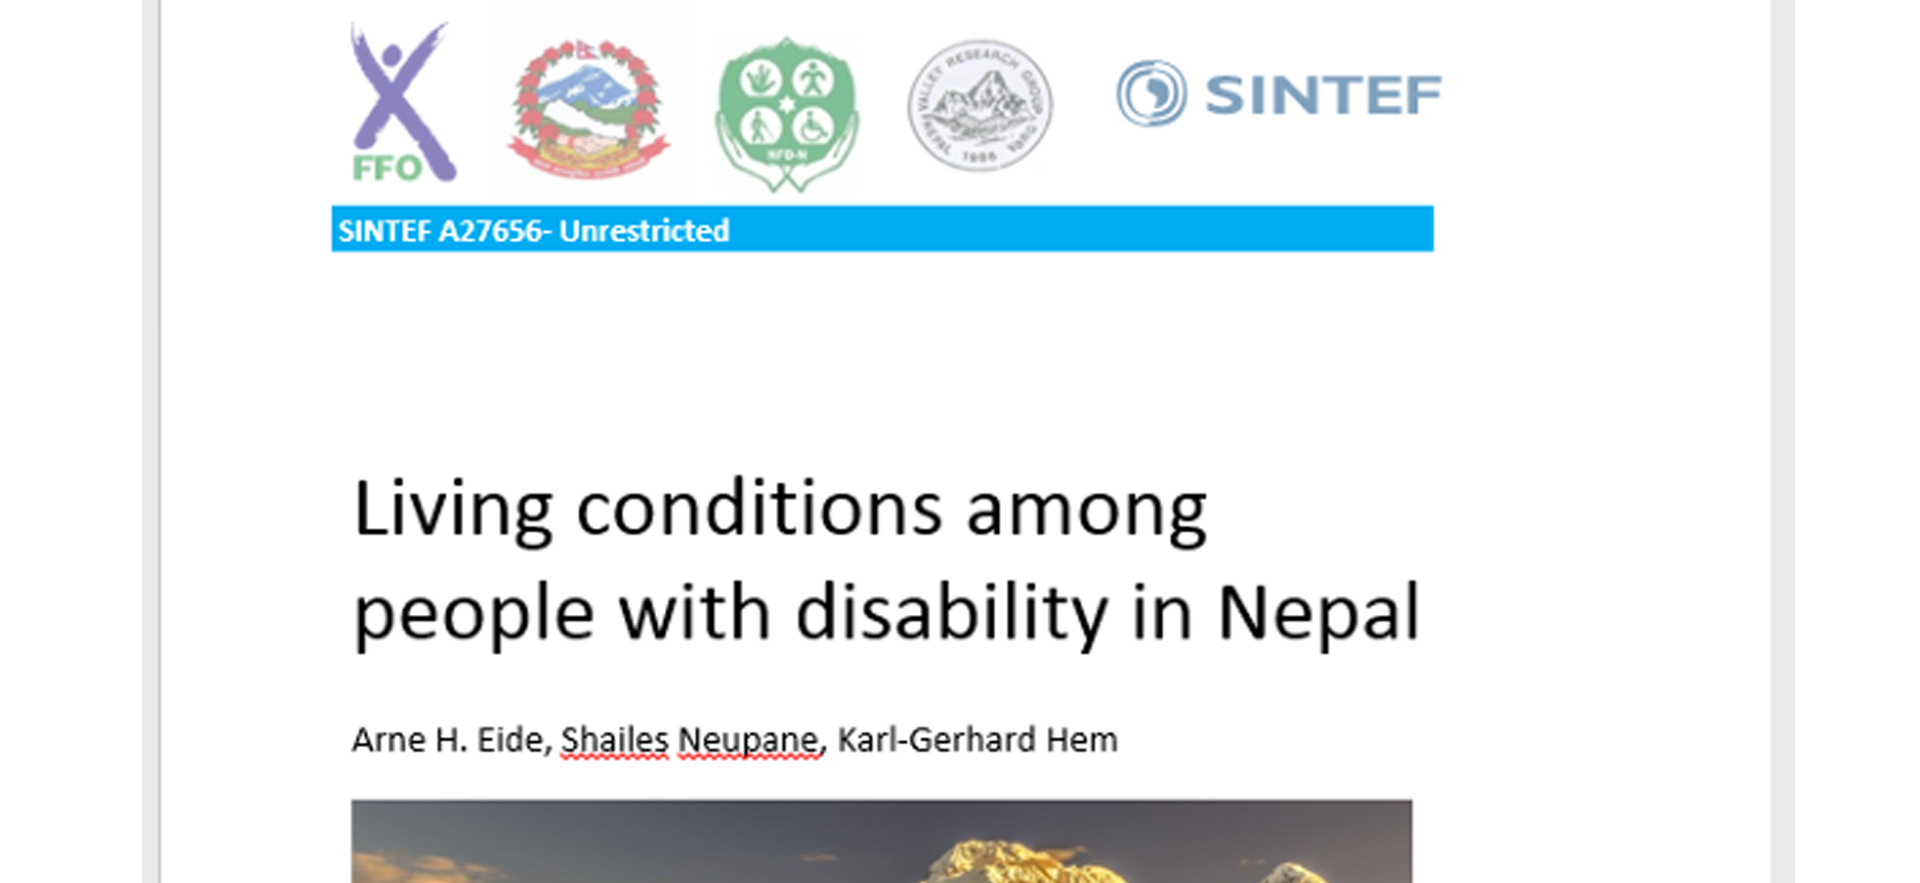 living-conditions-among-people-with-disability-in-nepal-report-sintef-2015